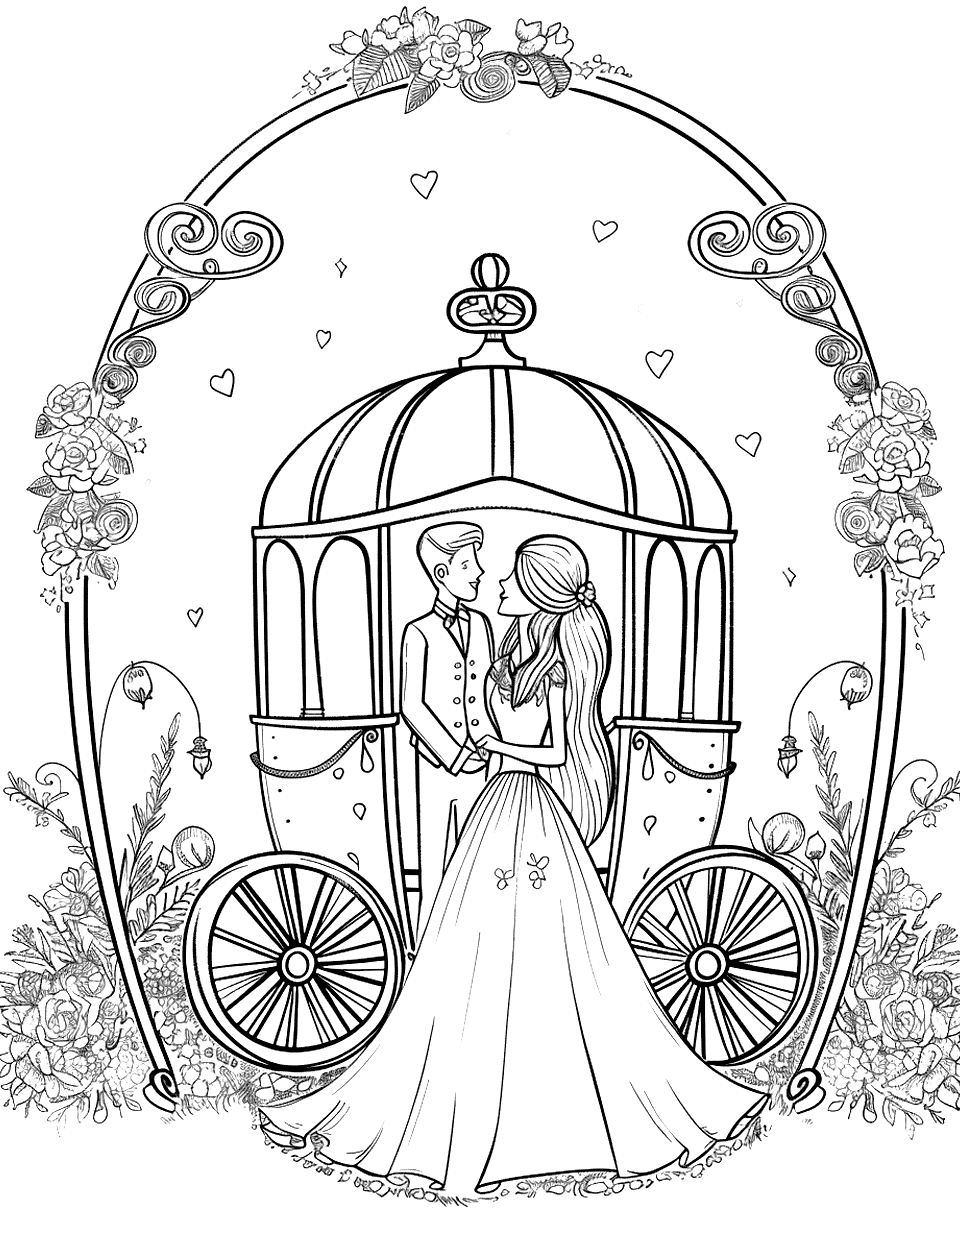 Fairy Tale Carriage Wedding Coloring Page - A fantasy carriage waiting to whisk the bride and groom away, drawn in a whimsical style.